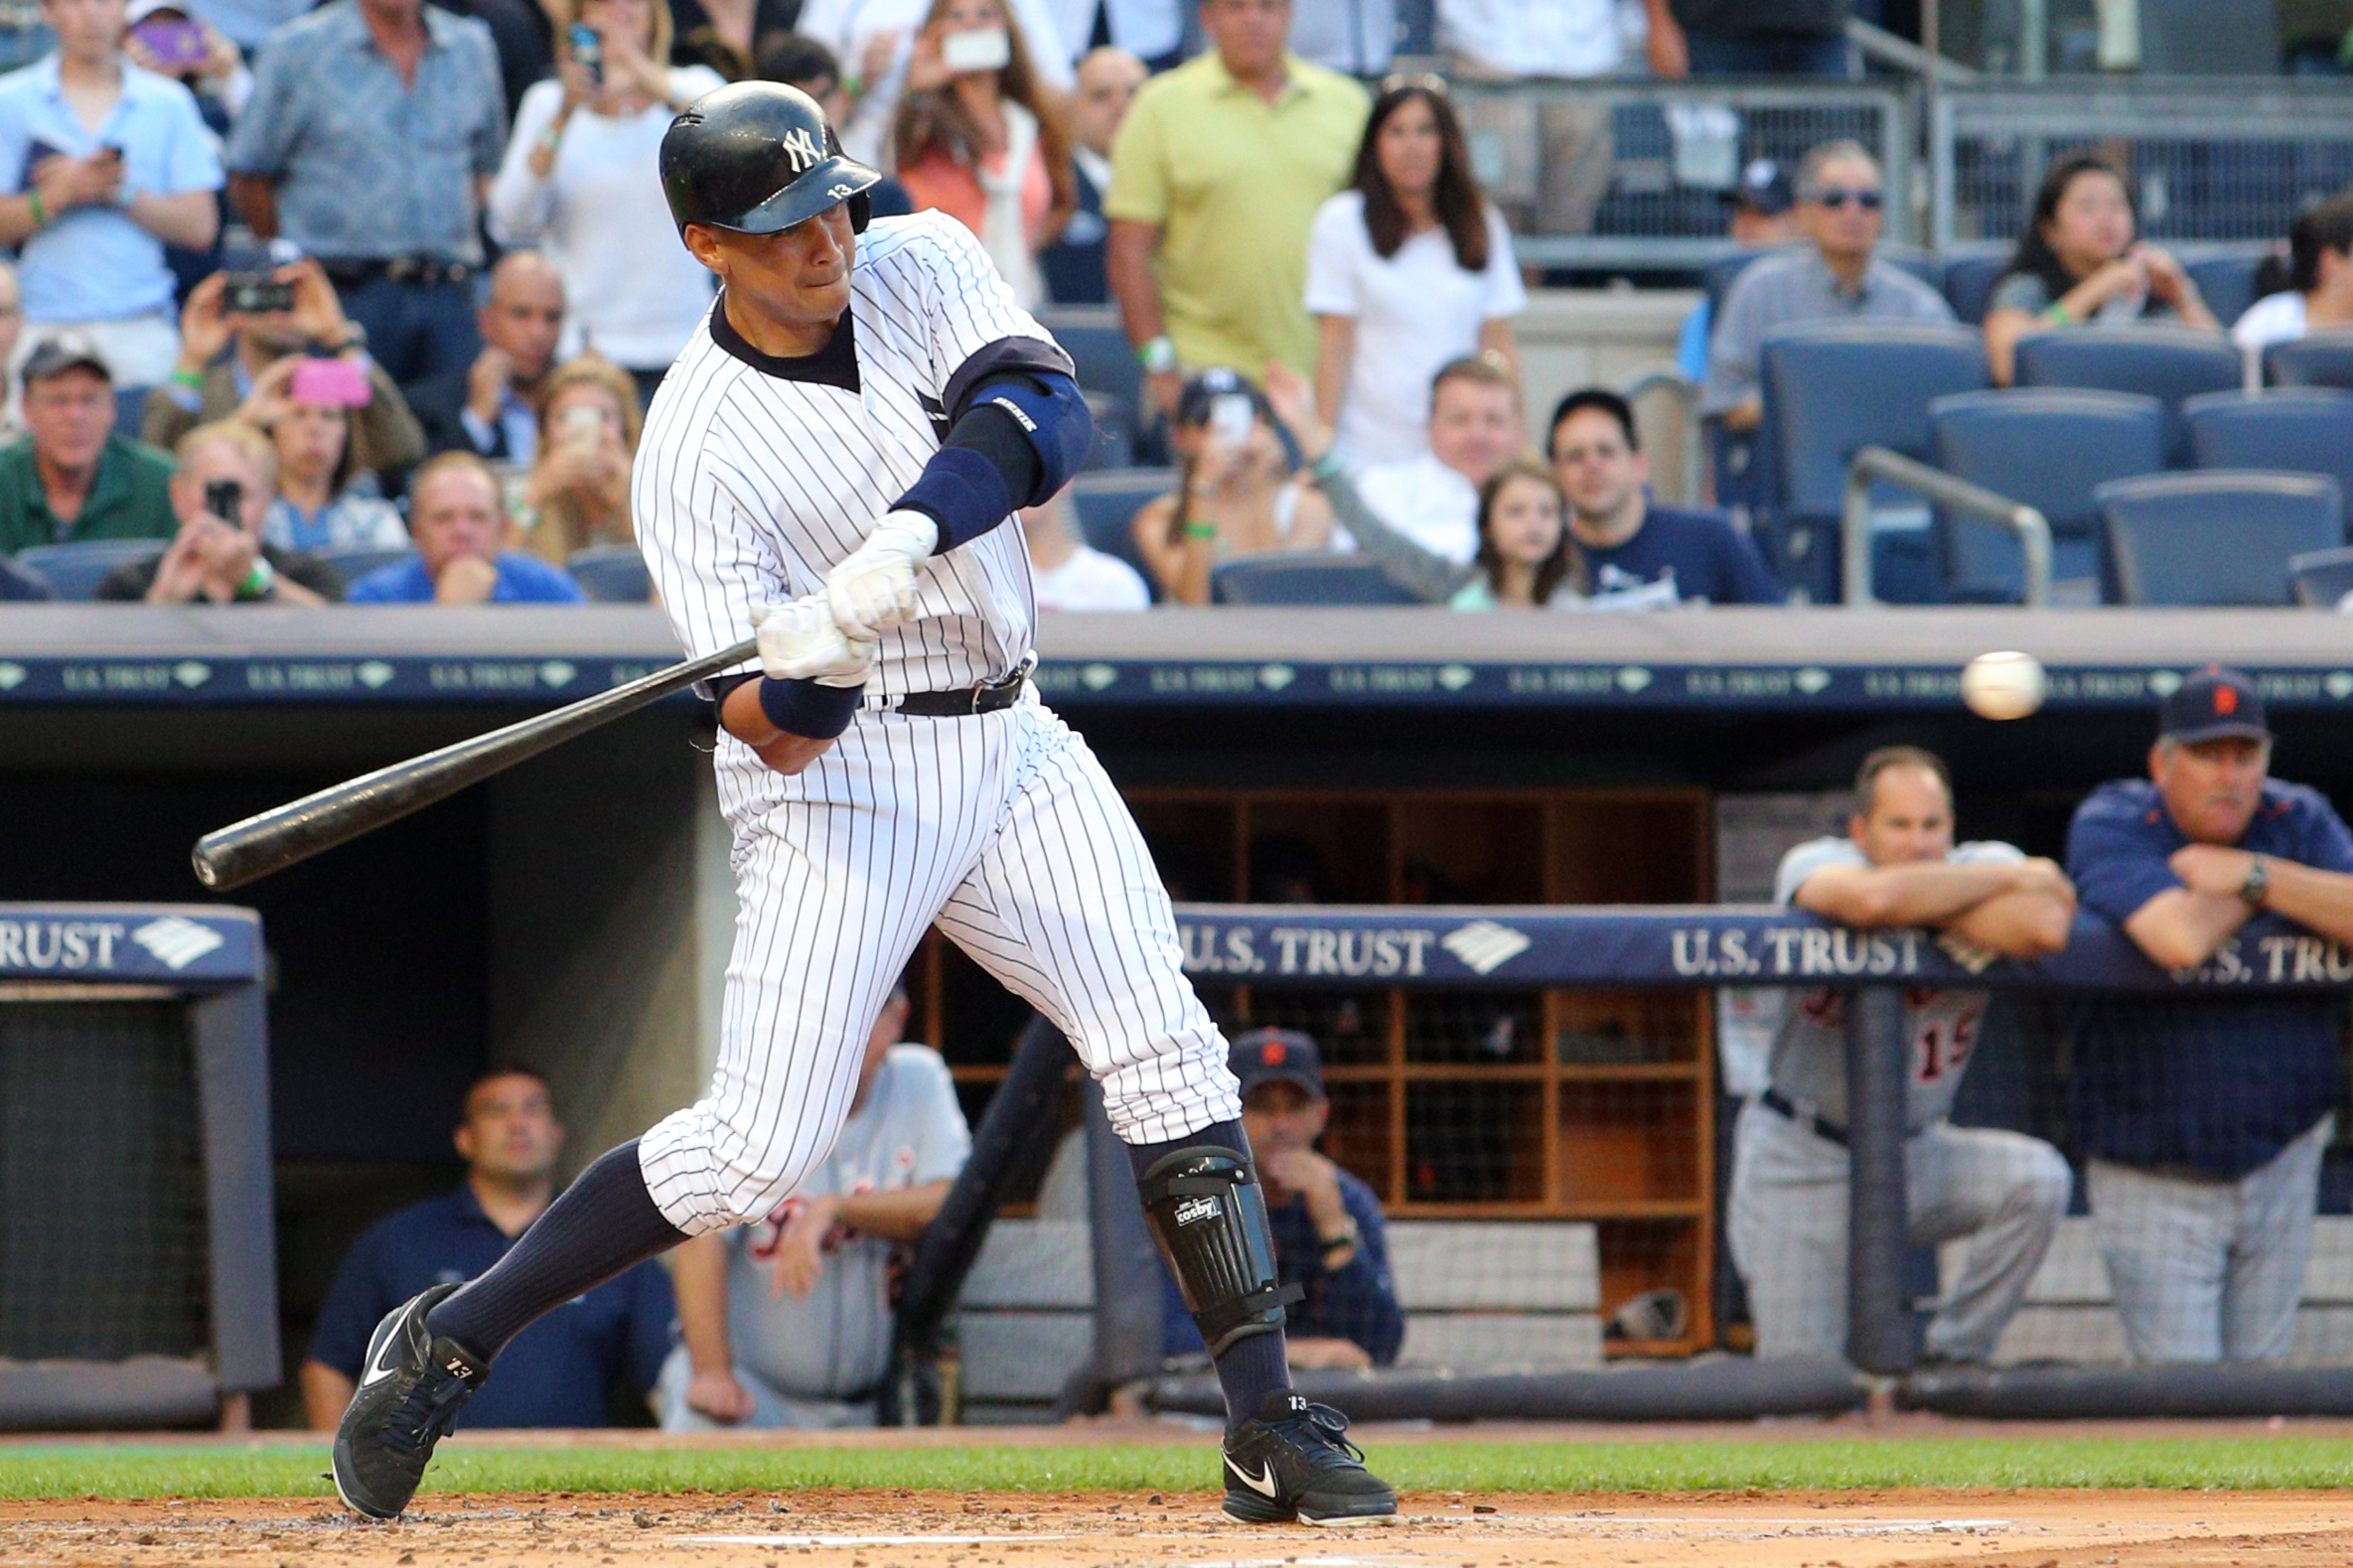 Alex Rodriguez homers for 3,000th hit CBS News